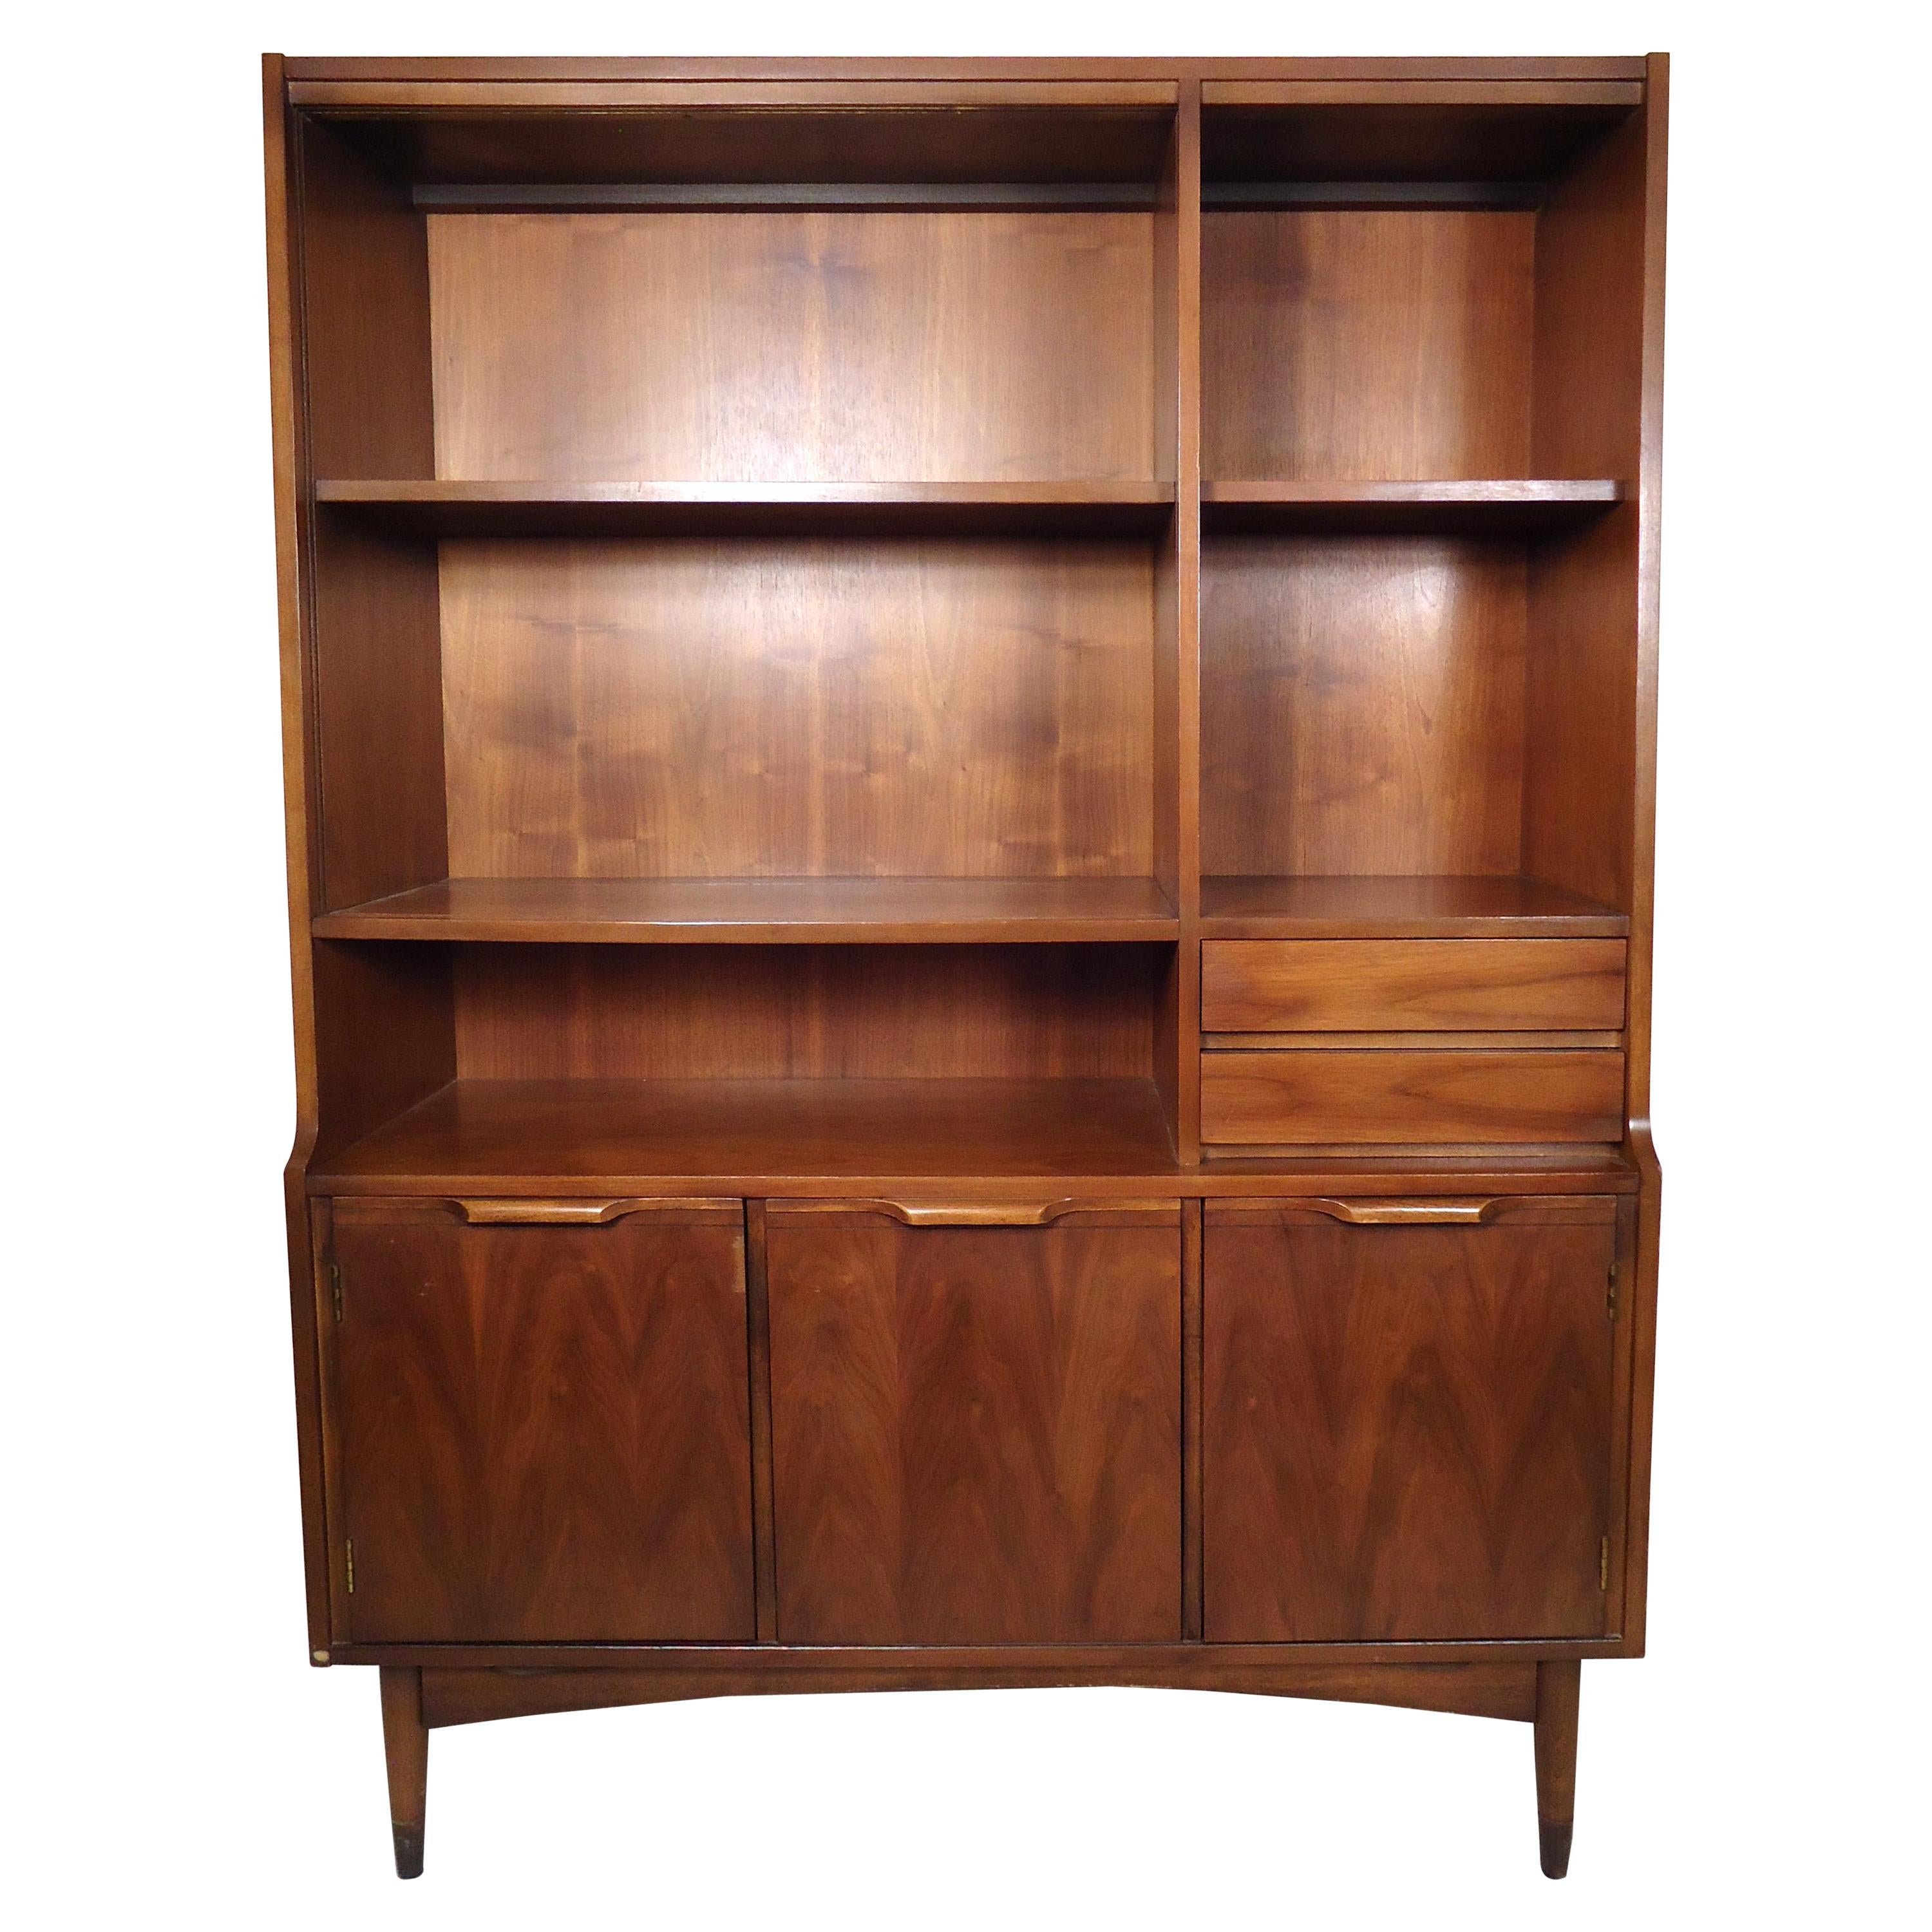 Vintage modern credenza and hutch on top. Lovely walnut grain throughout with sculpted handles. Great for an office or living room.

(Please confirm item location - NY or NJ - with dealer).
     